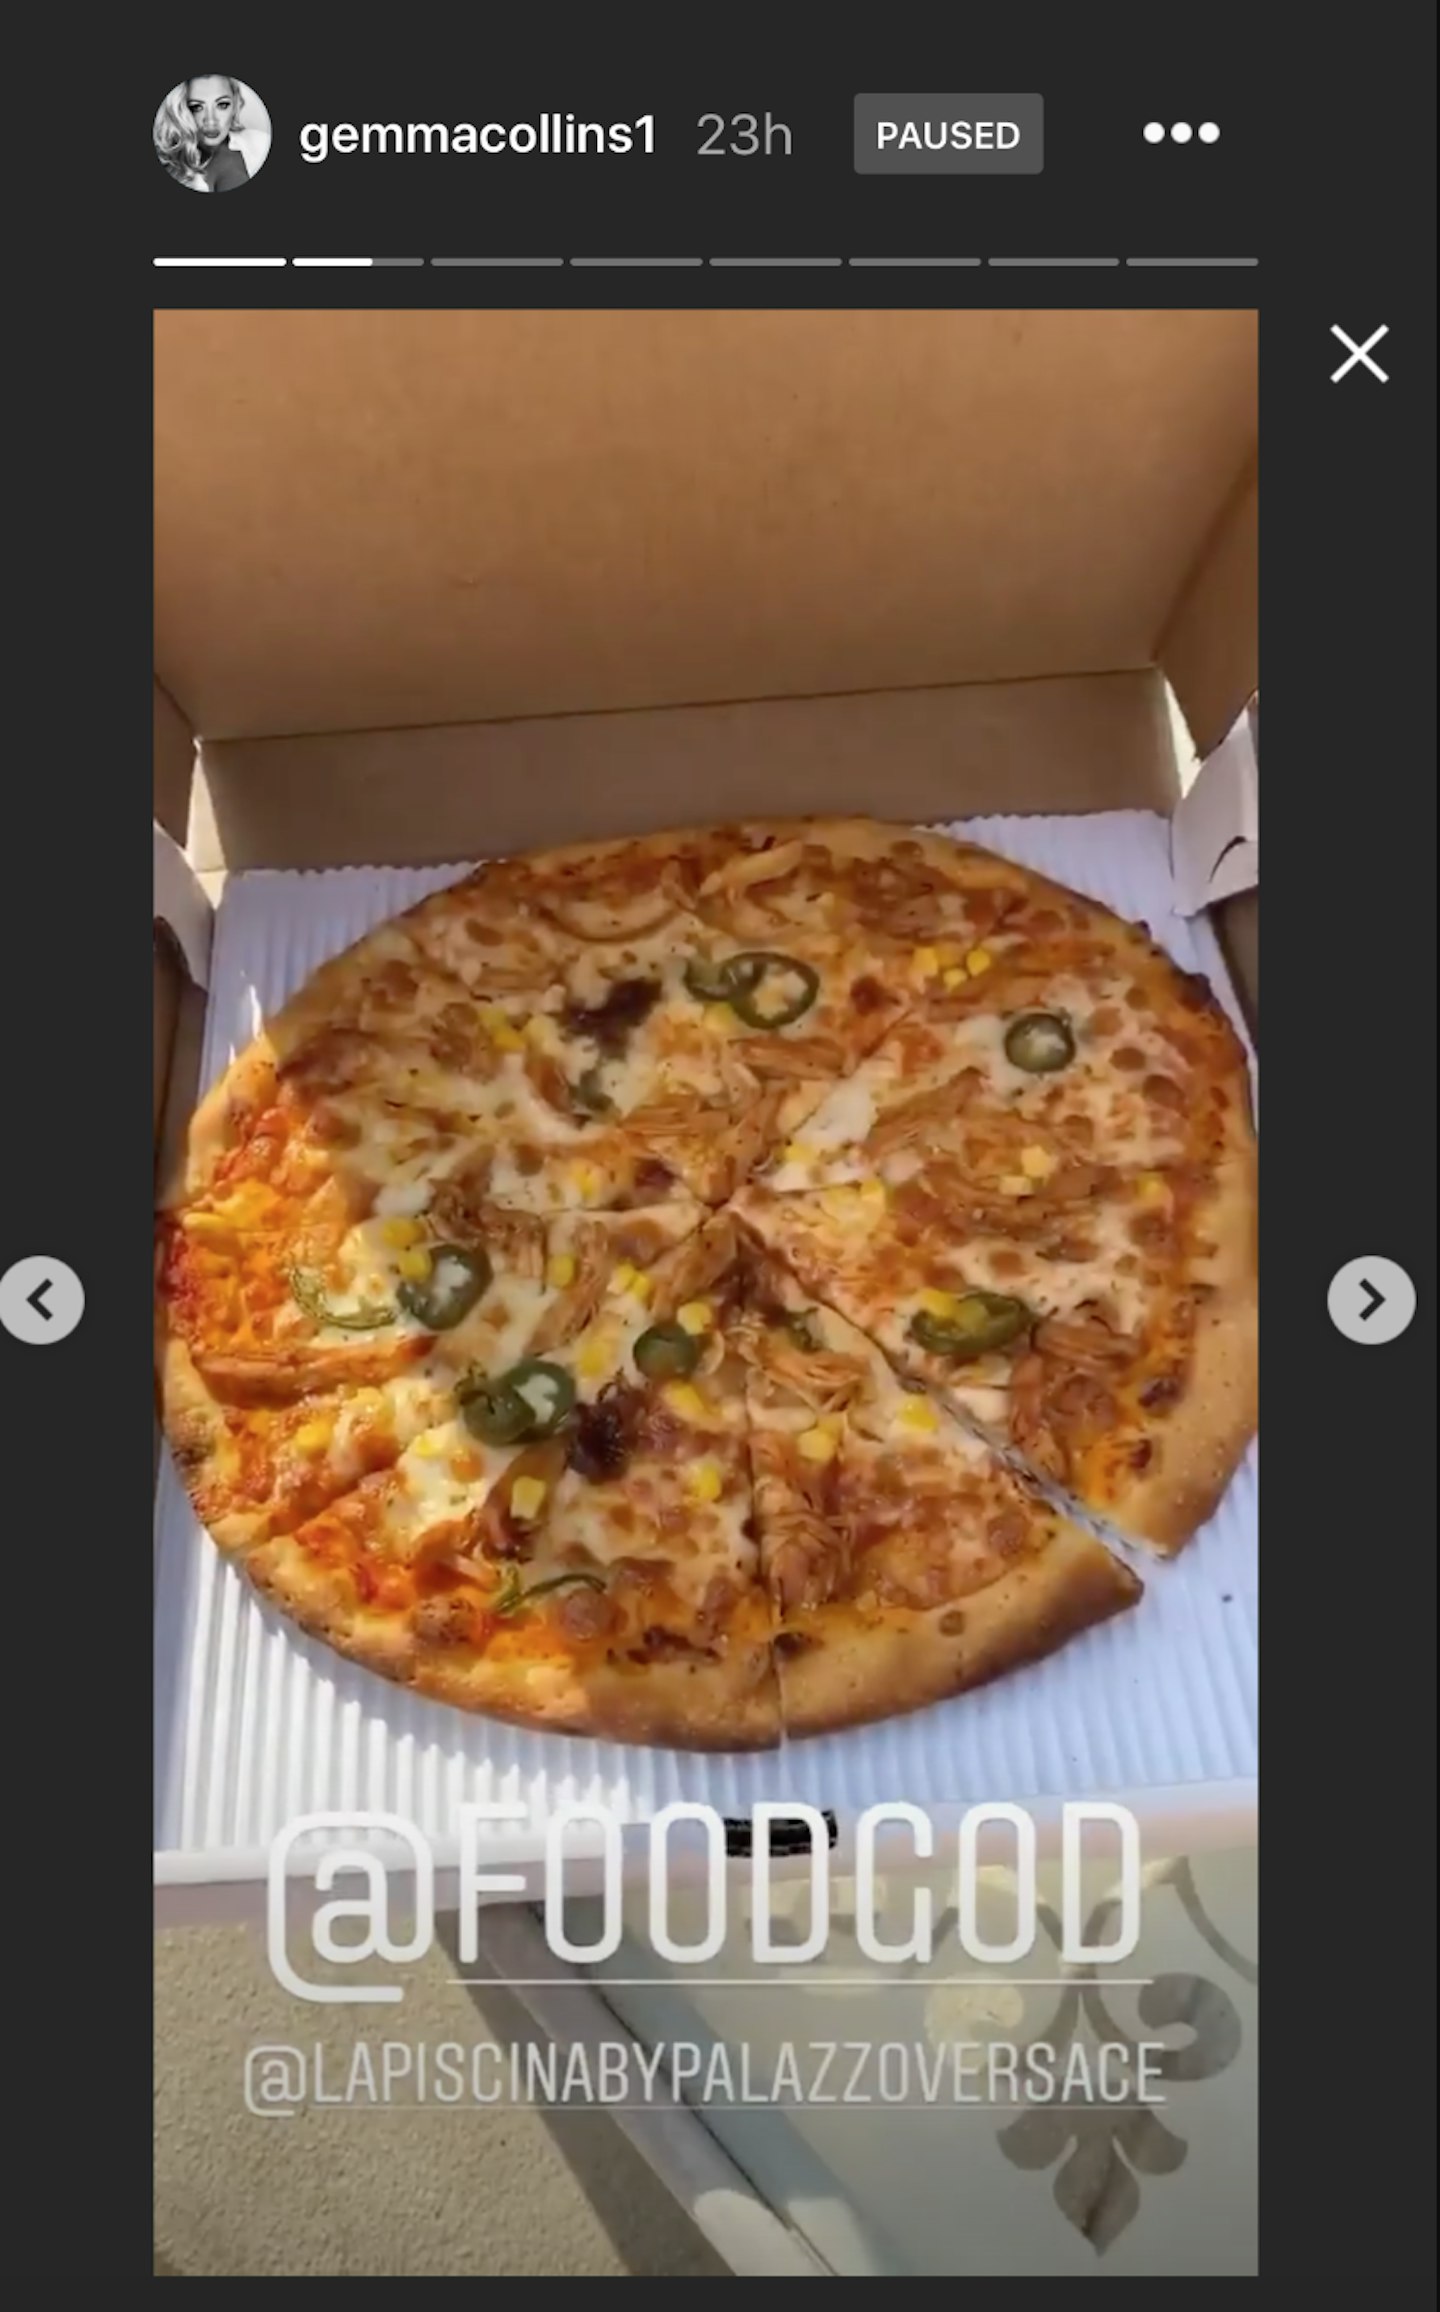 The GC's pizza snap to Foodgod